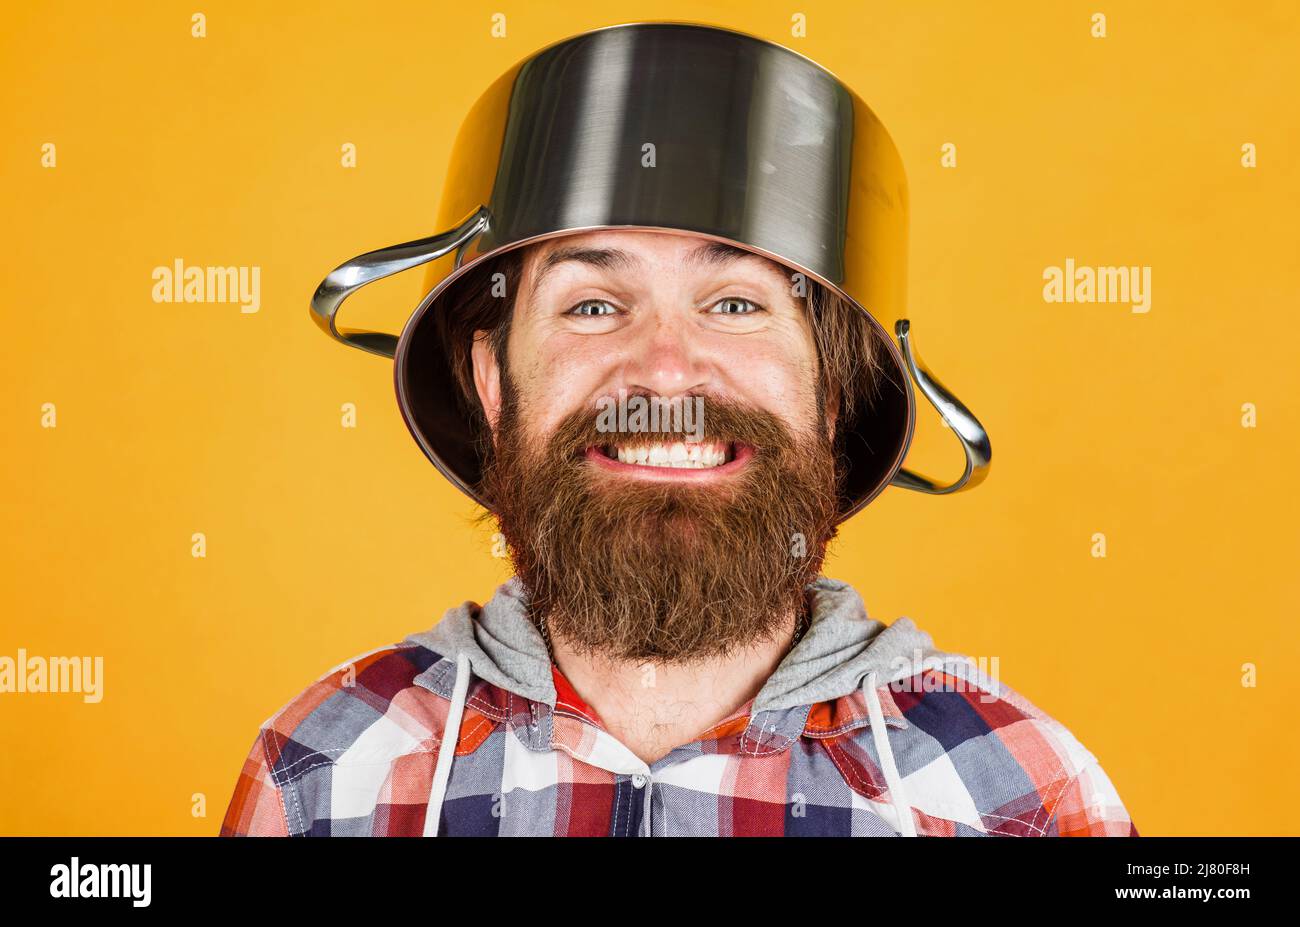 Kitchenware. Cooking utensil for food preparation. Kitchen cookware. Crazy chef with pot on head. Stock Photo